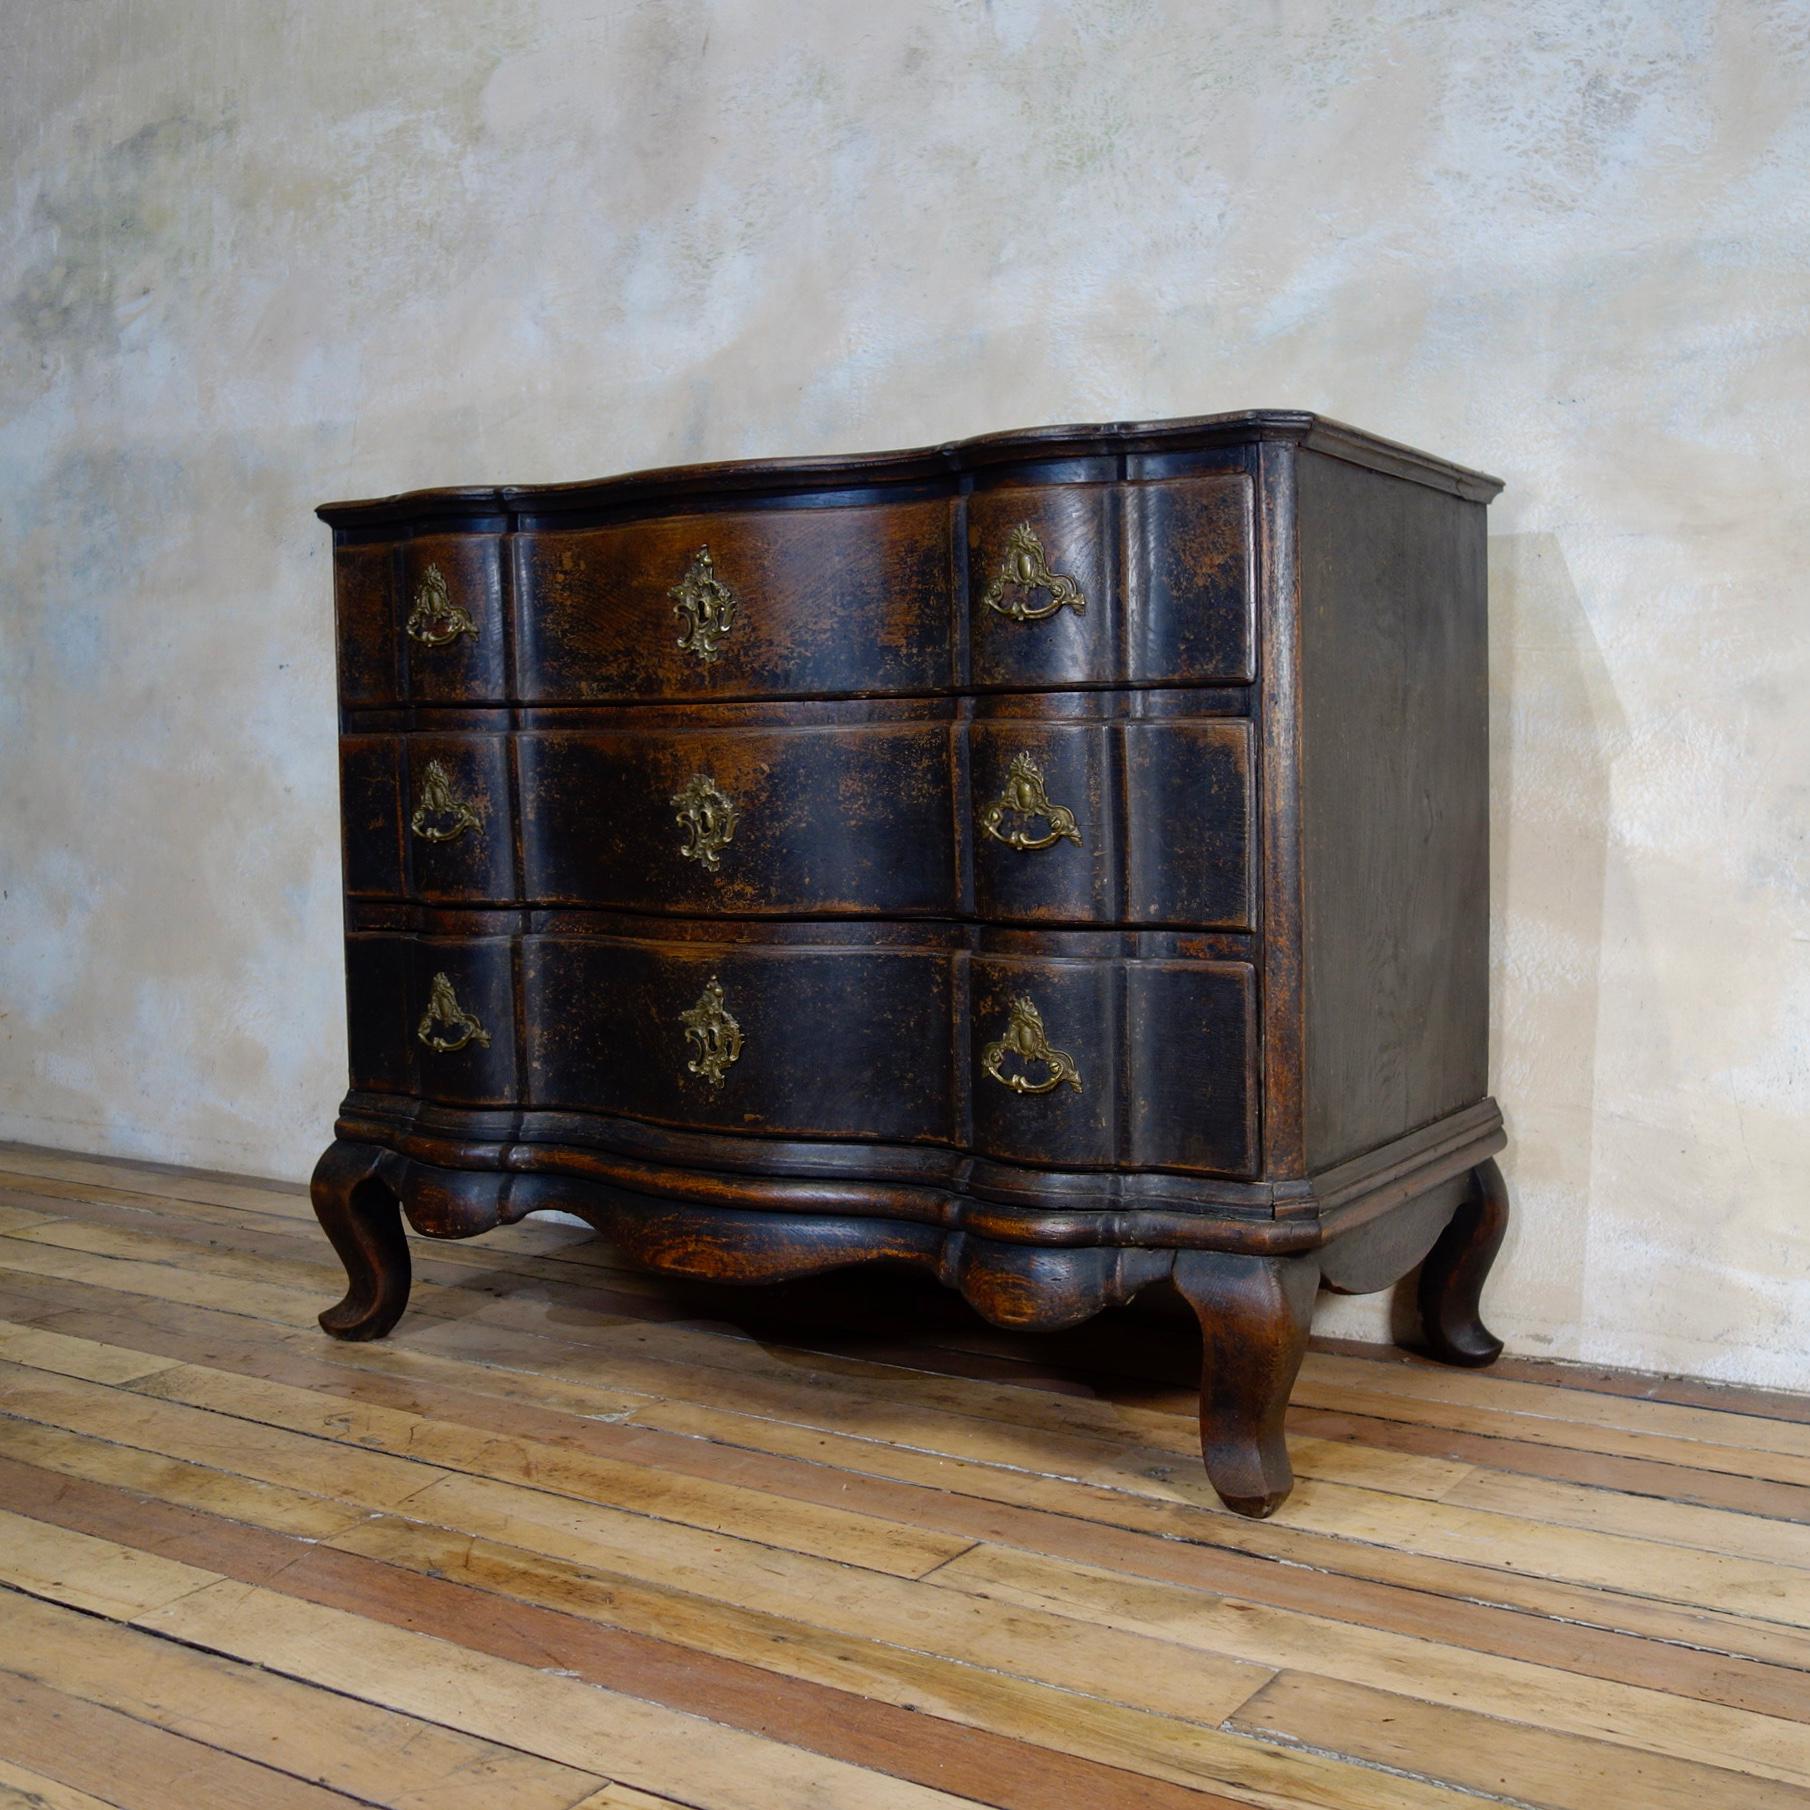 An elegant 18th century Danish Baroque commode. Demonstrating three full length serpentine drawers, Raised on monumental cabriole supports joined by an elegantly shaped apron. Displaying its original ebonized black paint. 

Measures:
Width